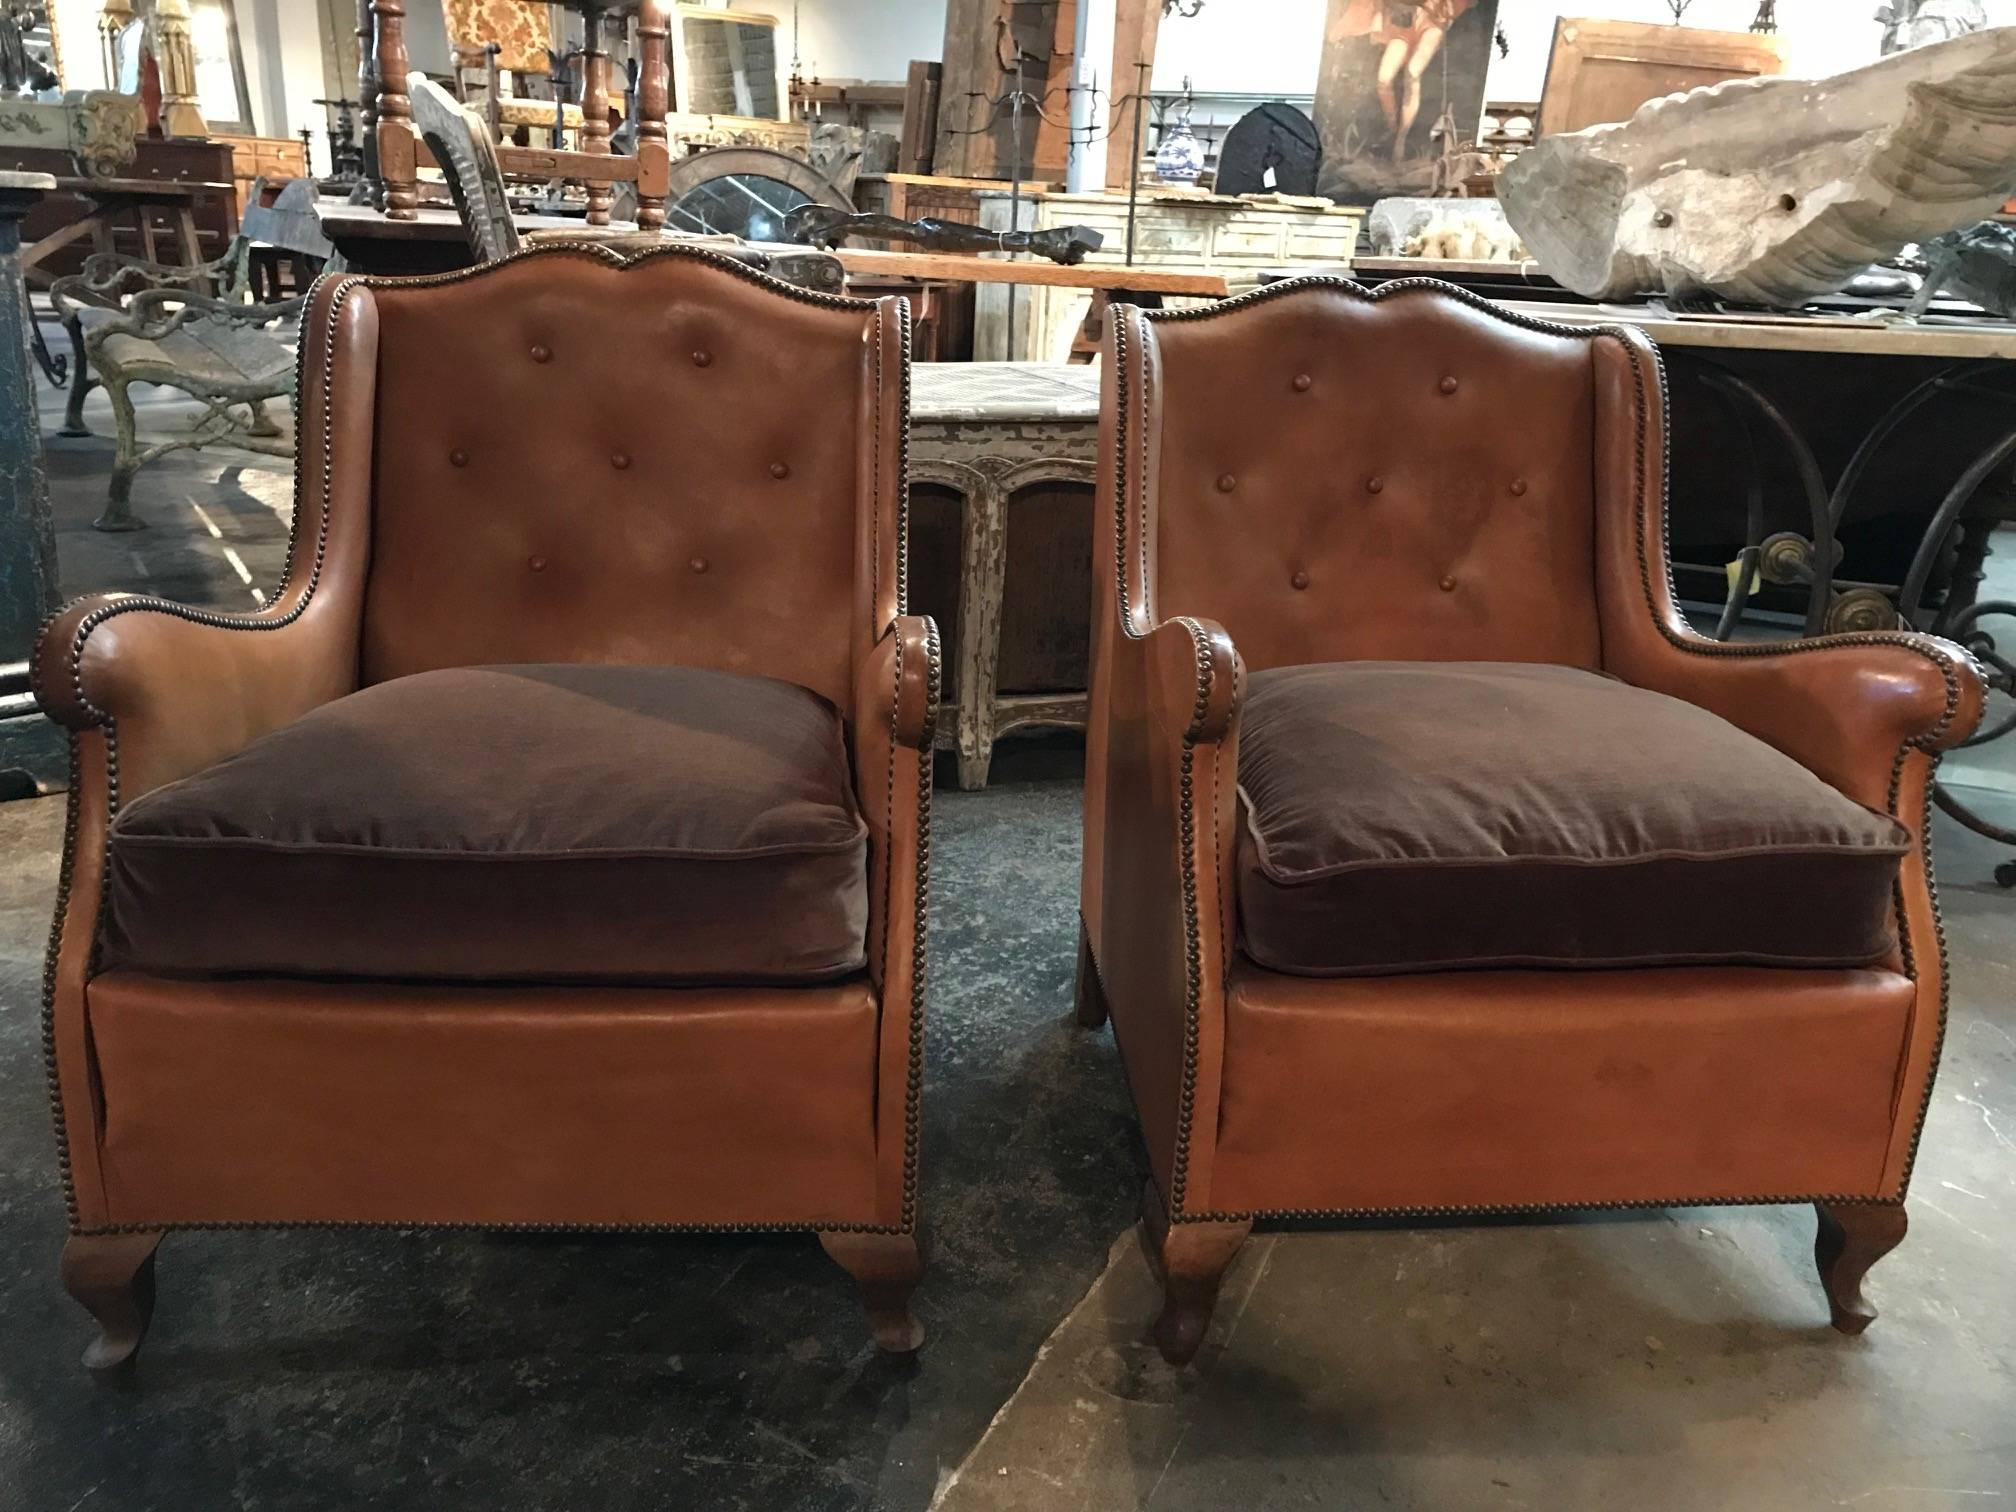 A terrific pair of French Art Deco leather club chairs. Soundly constructed and very comfortable with great nailhead detailing. The cushions have been newly reupholstered in velvet. Wonderful accent chairs for any living room, library or office.